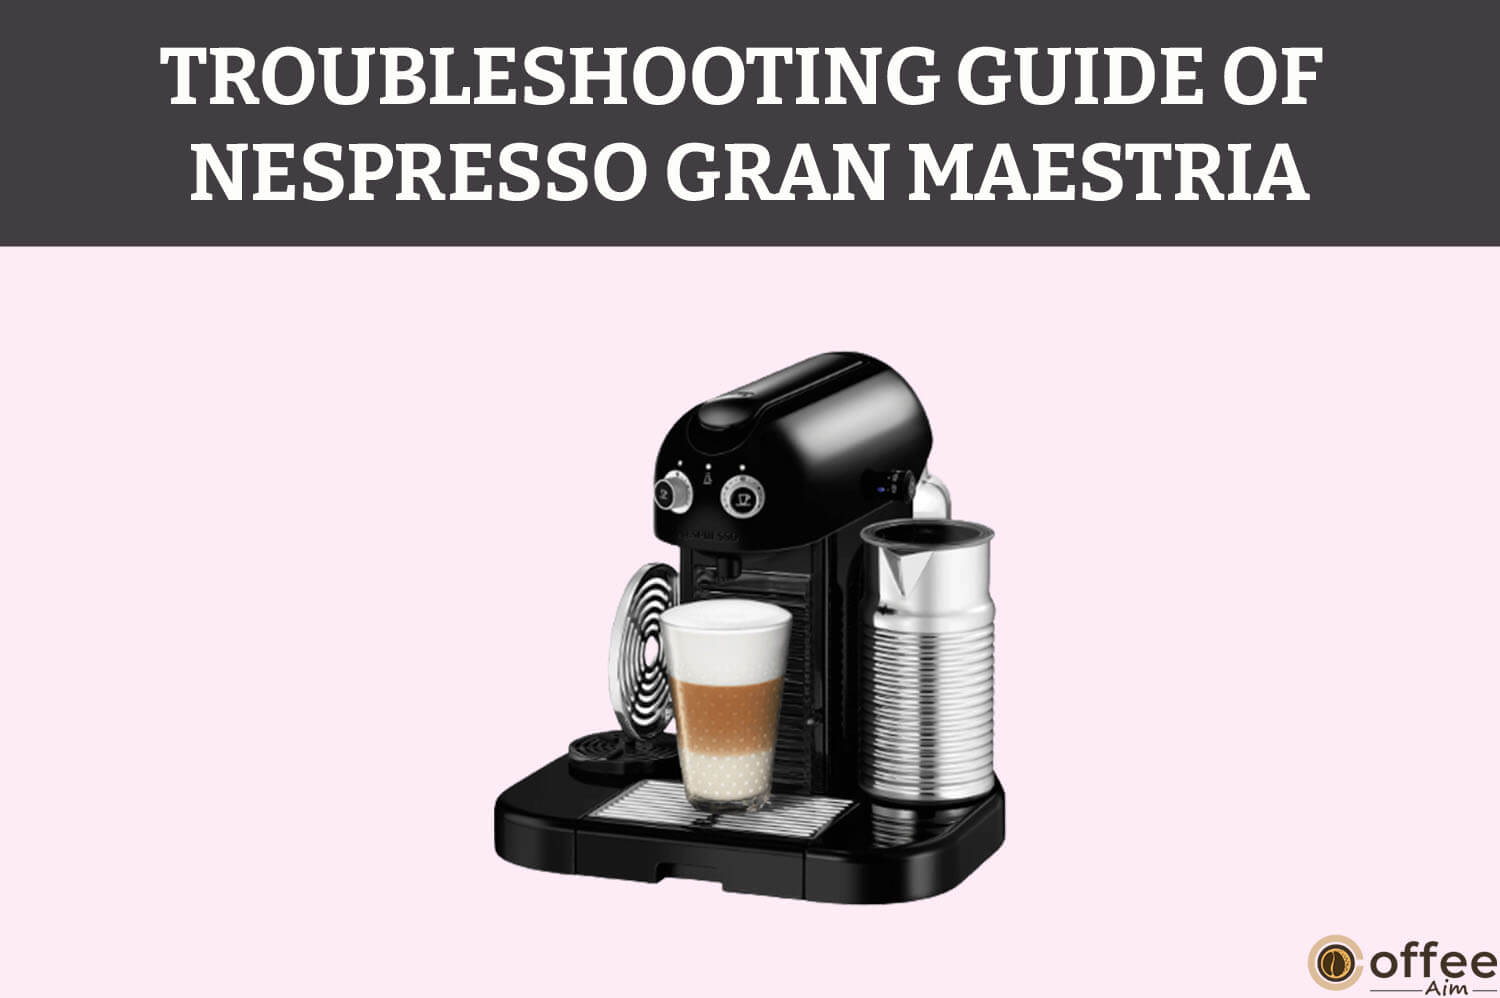 Featured image for the article "Troubleshooting Guide of Nespresso Gran Maestria"